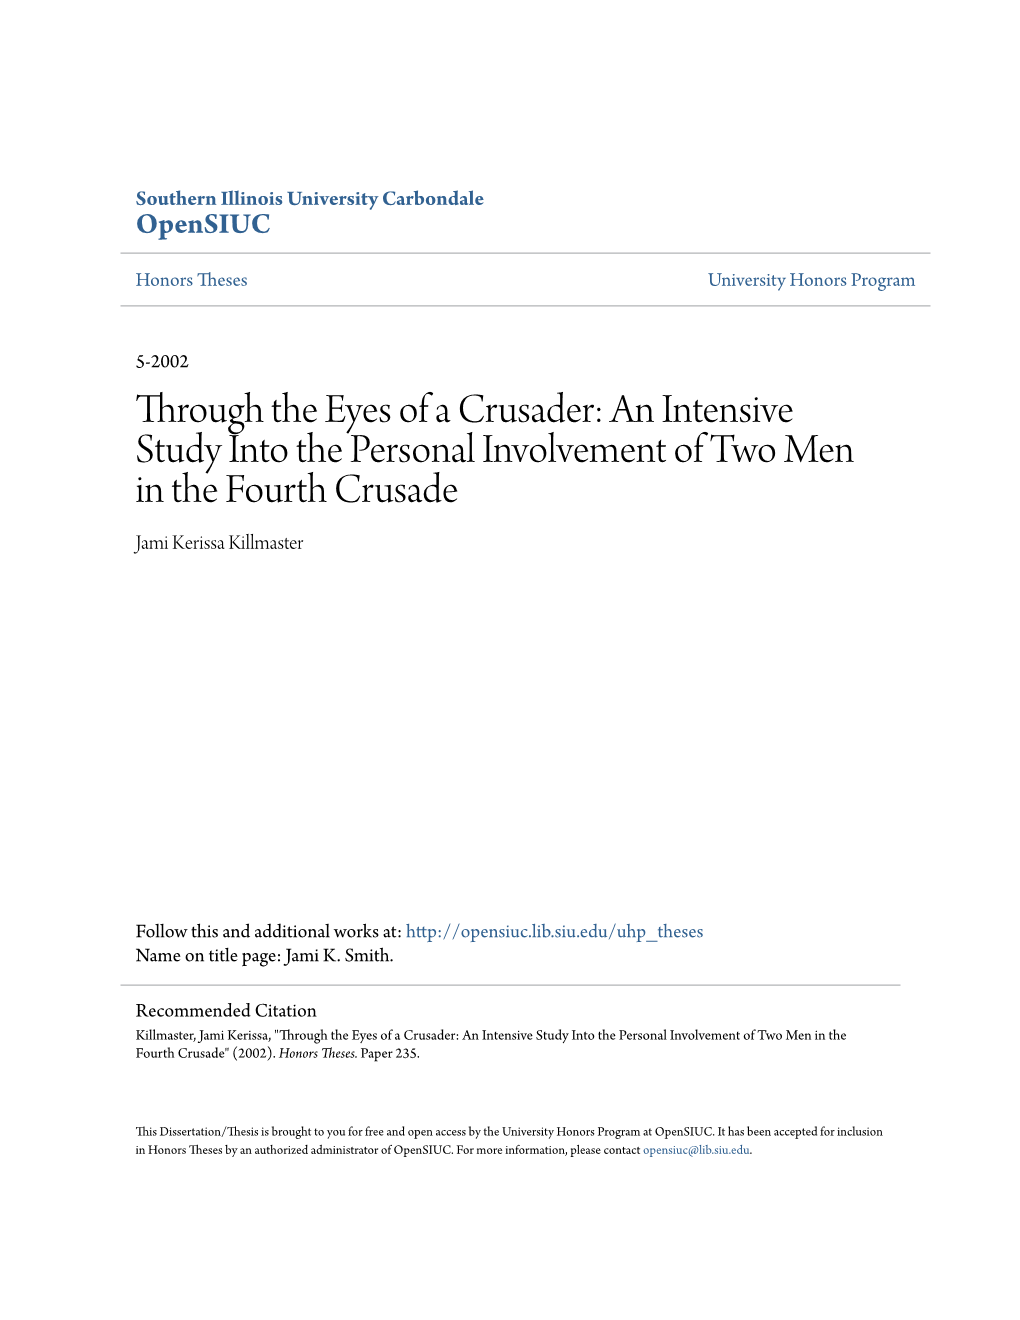 Through the Eyes of a Crusader: an Intensive Study Into the Personal Involvement of Two Men in the Fourth Crusade Jami Kerissa Killmaster